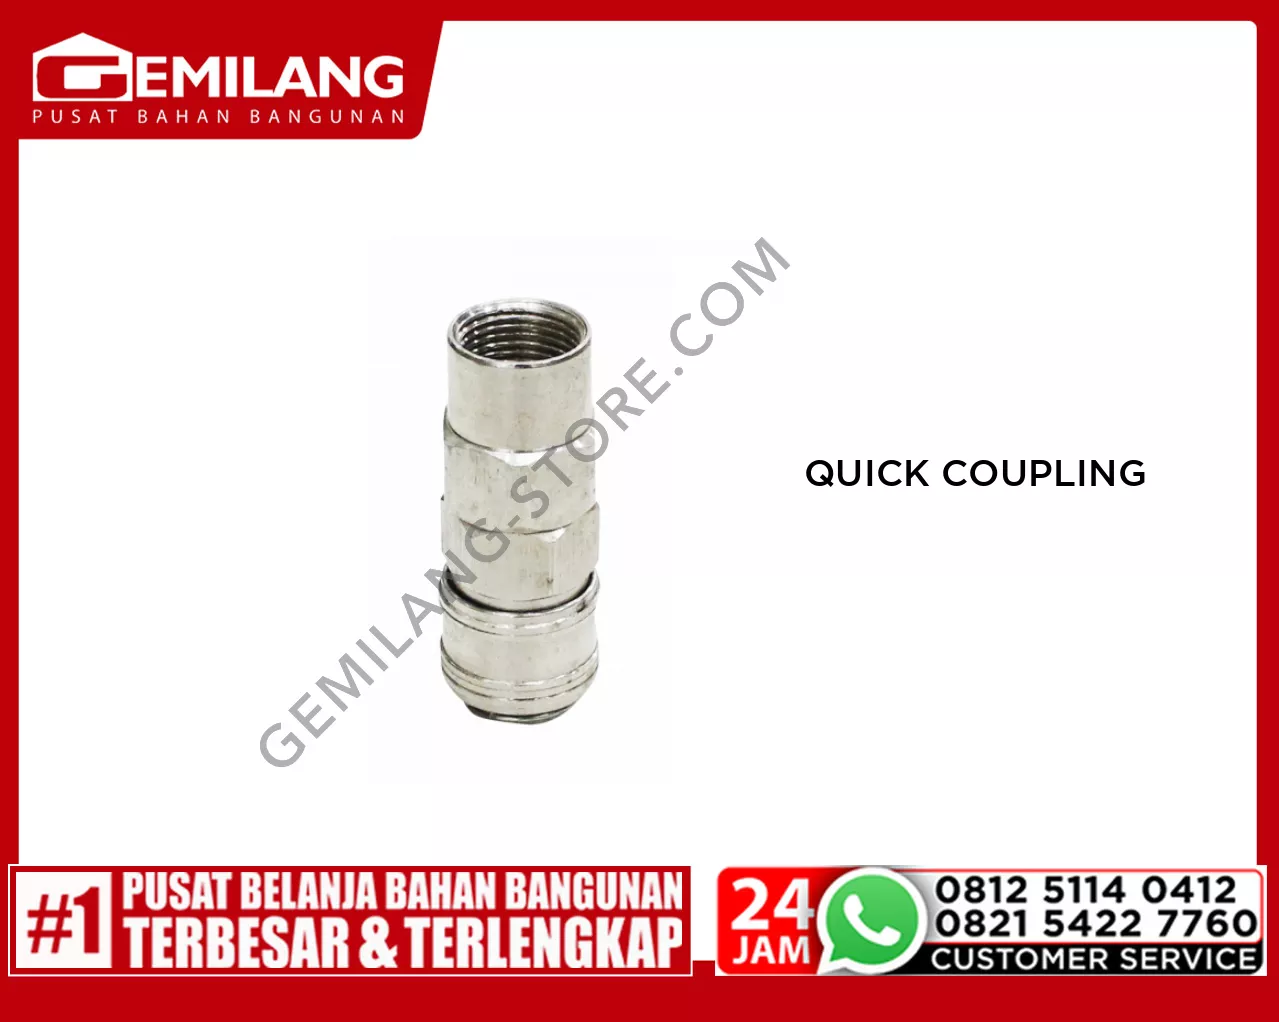 WIPRO QUICK COUPLING SF 23 TW